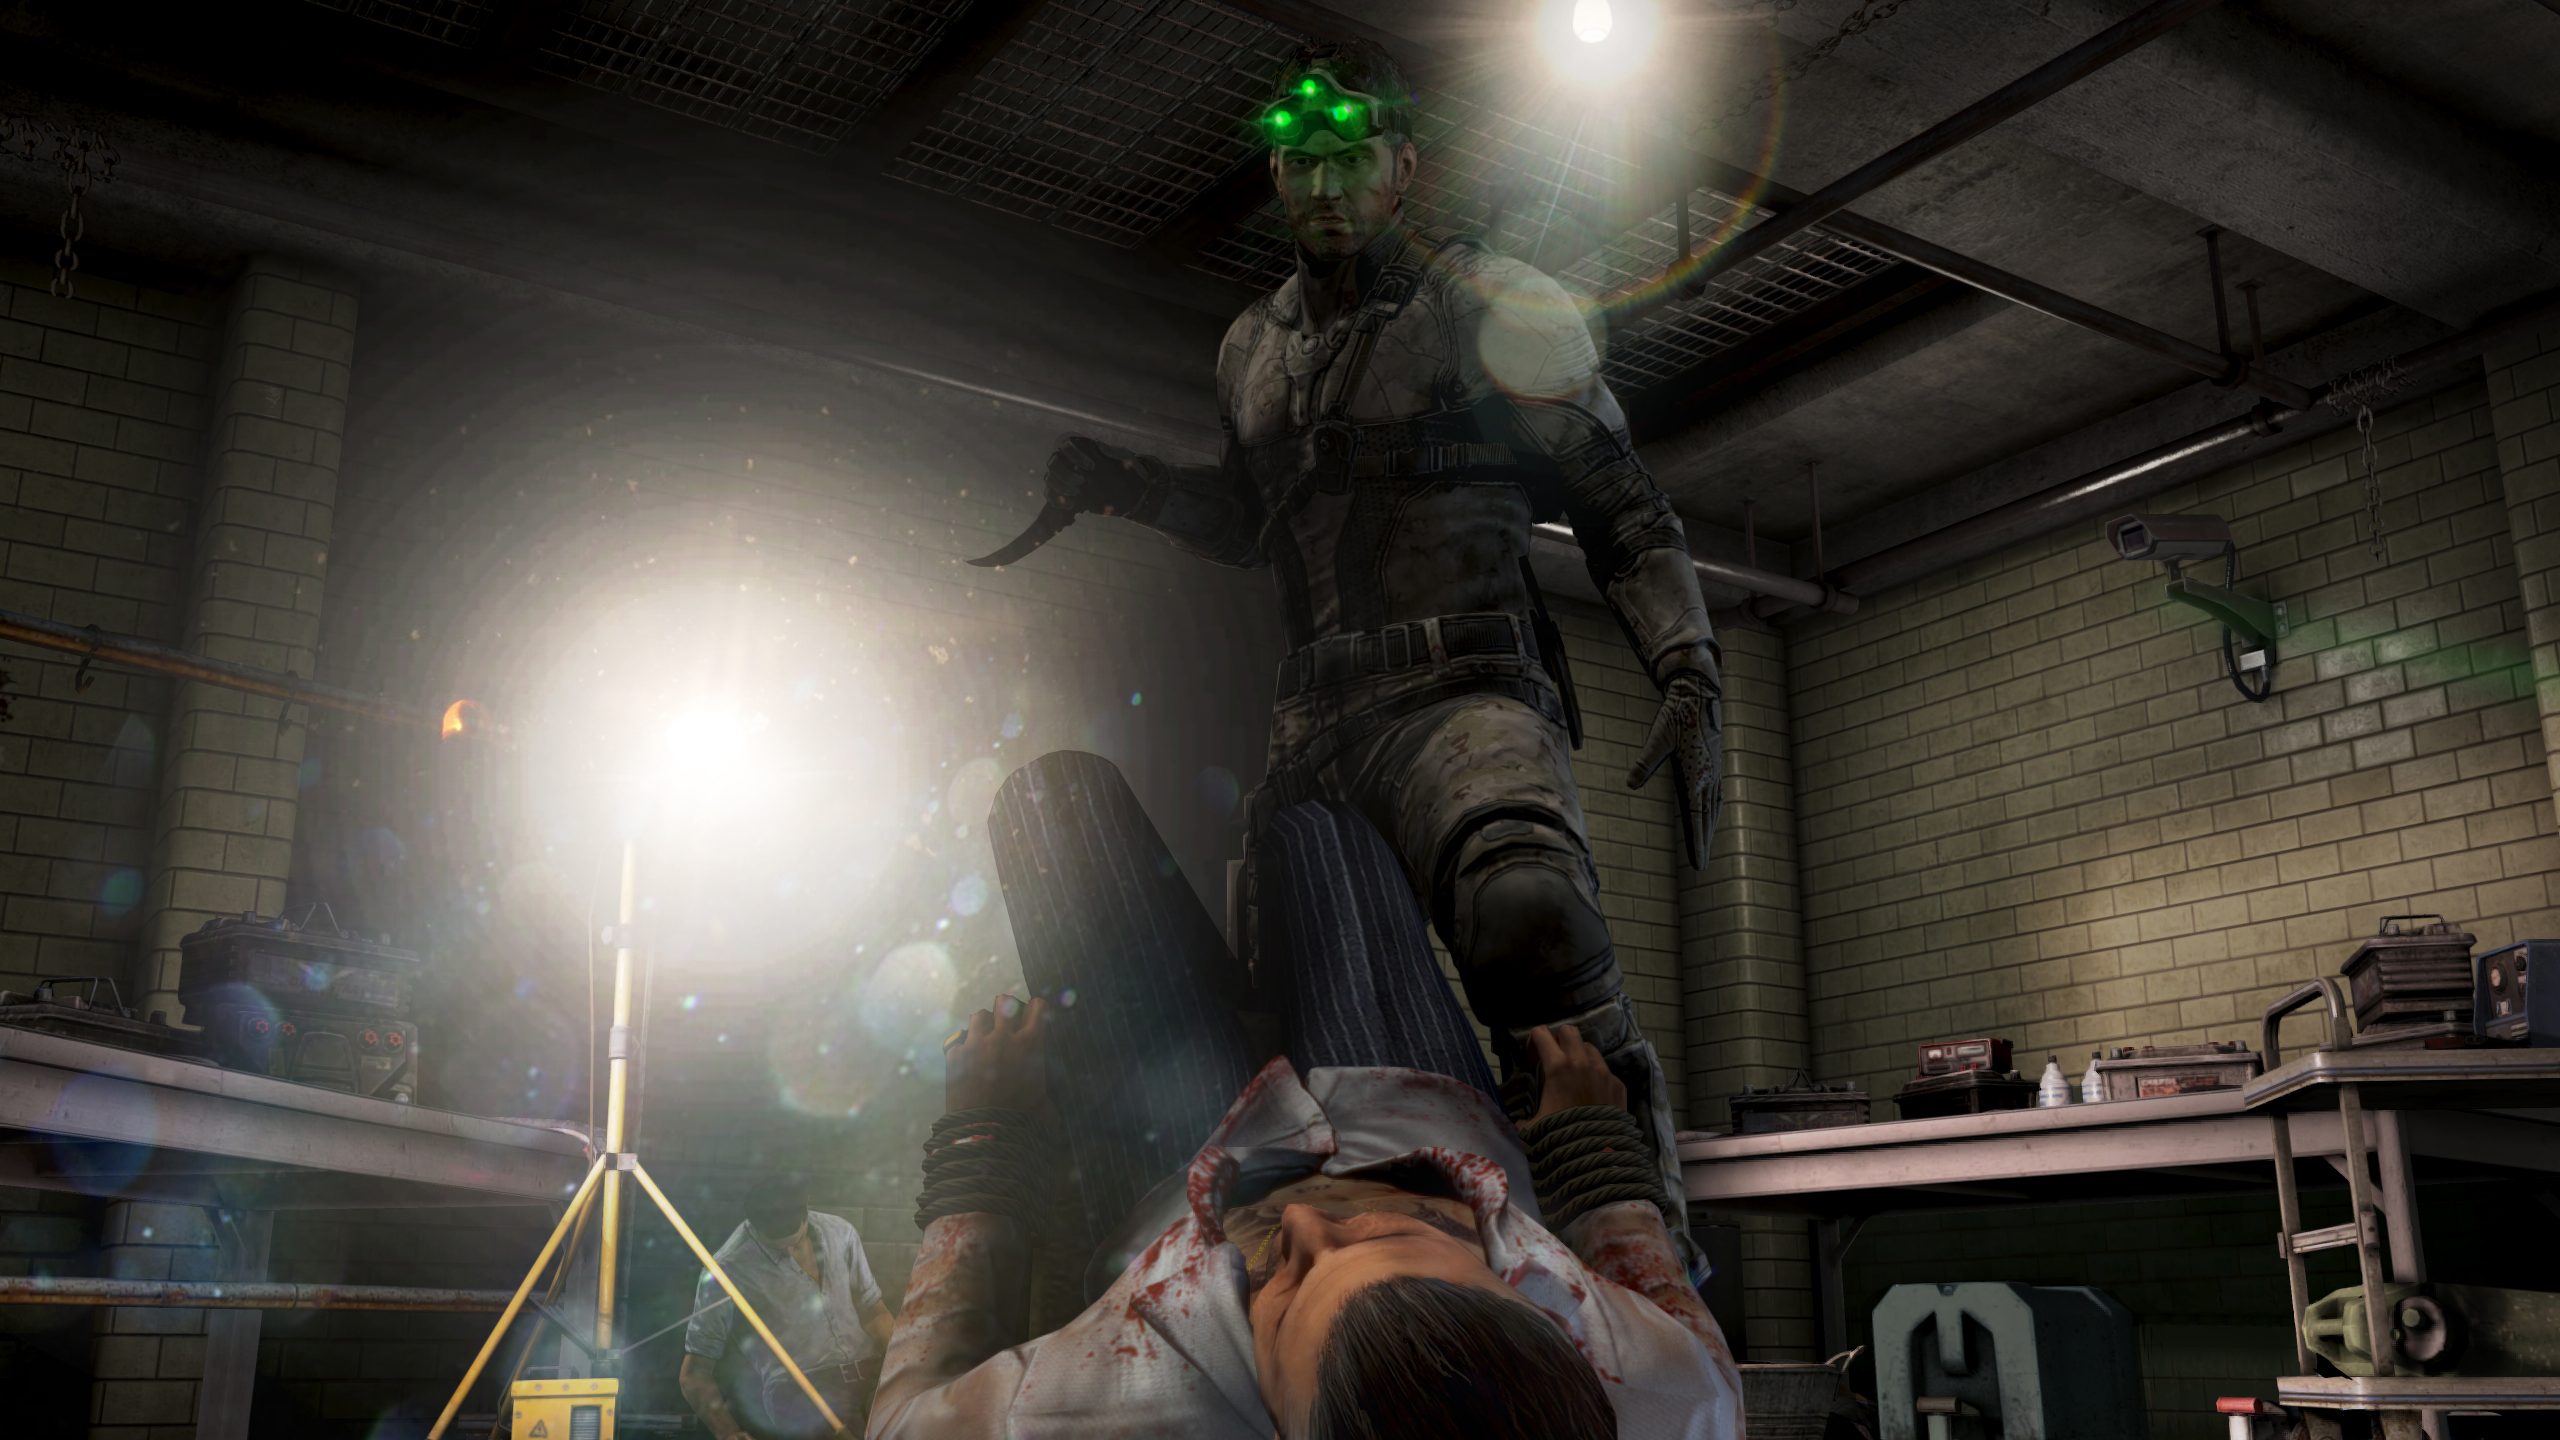 Splinter Cell remake will have refreshed storyline, but not rewritten